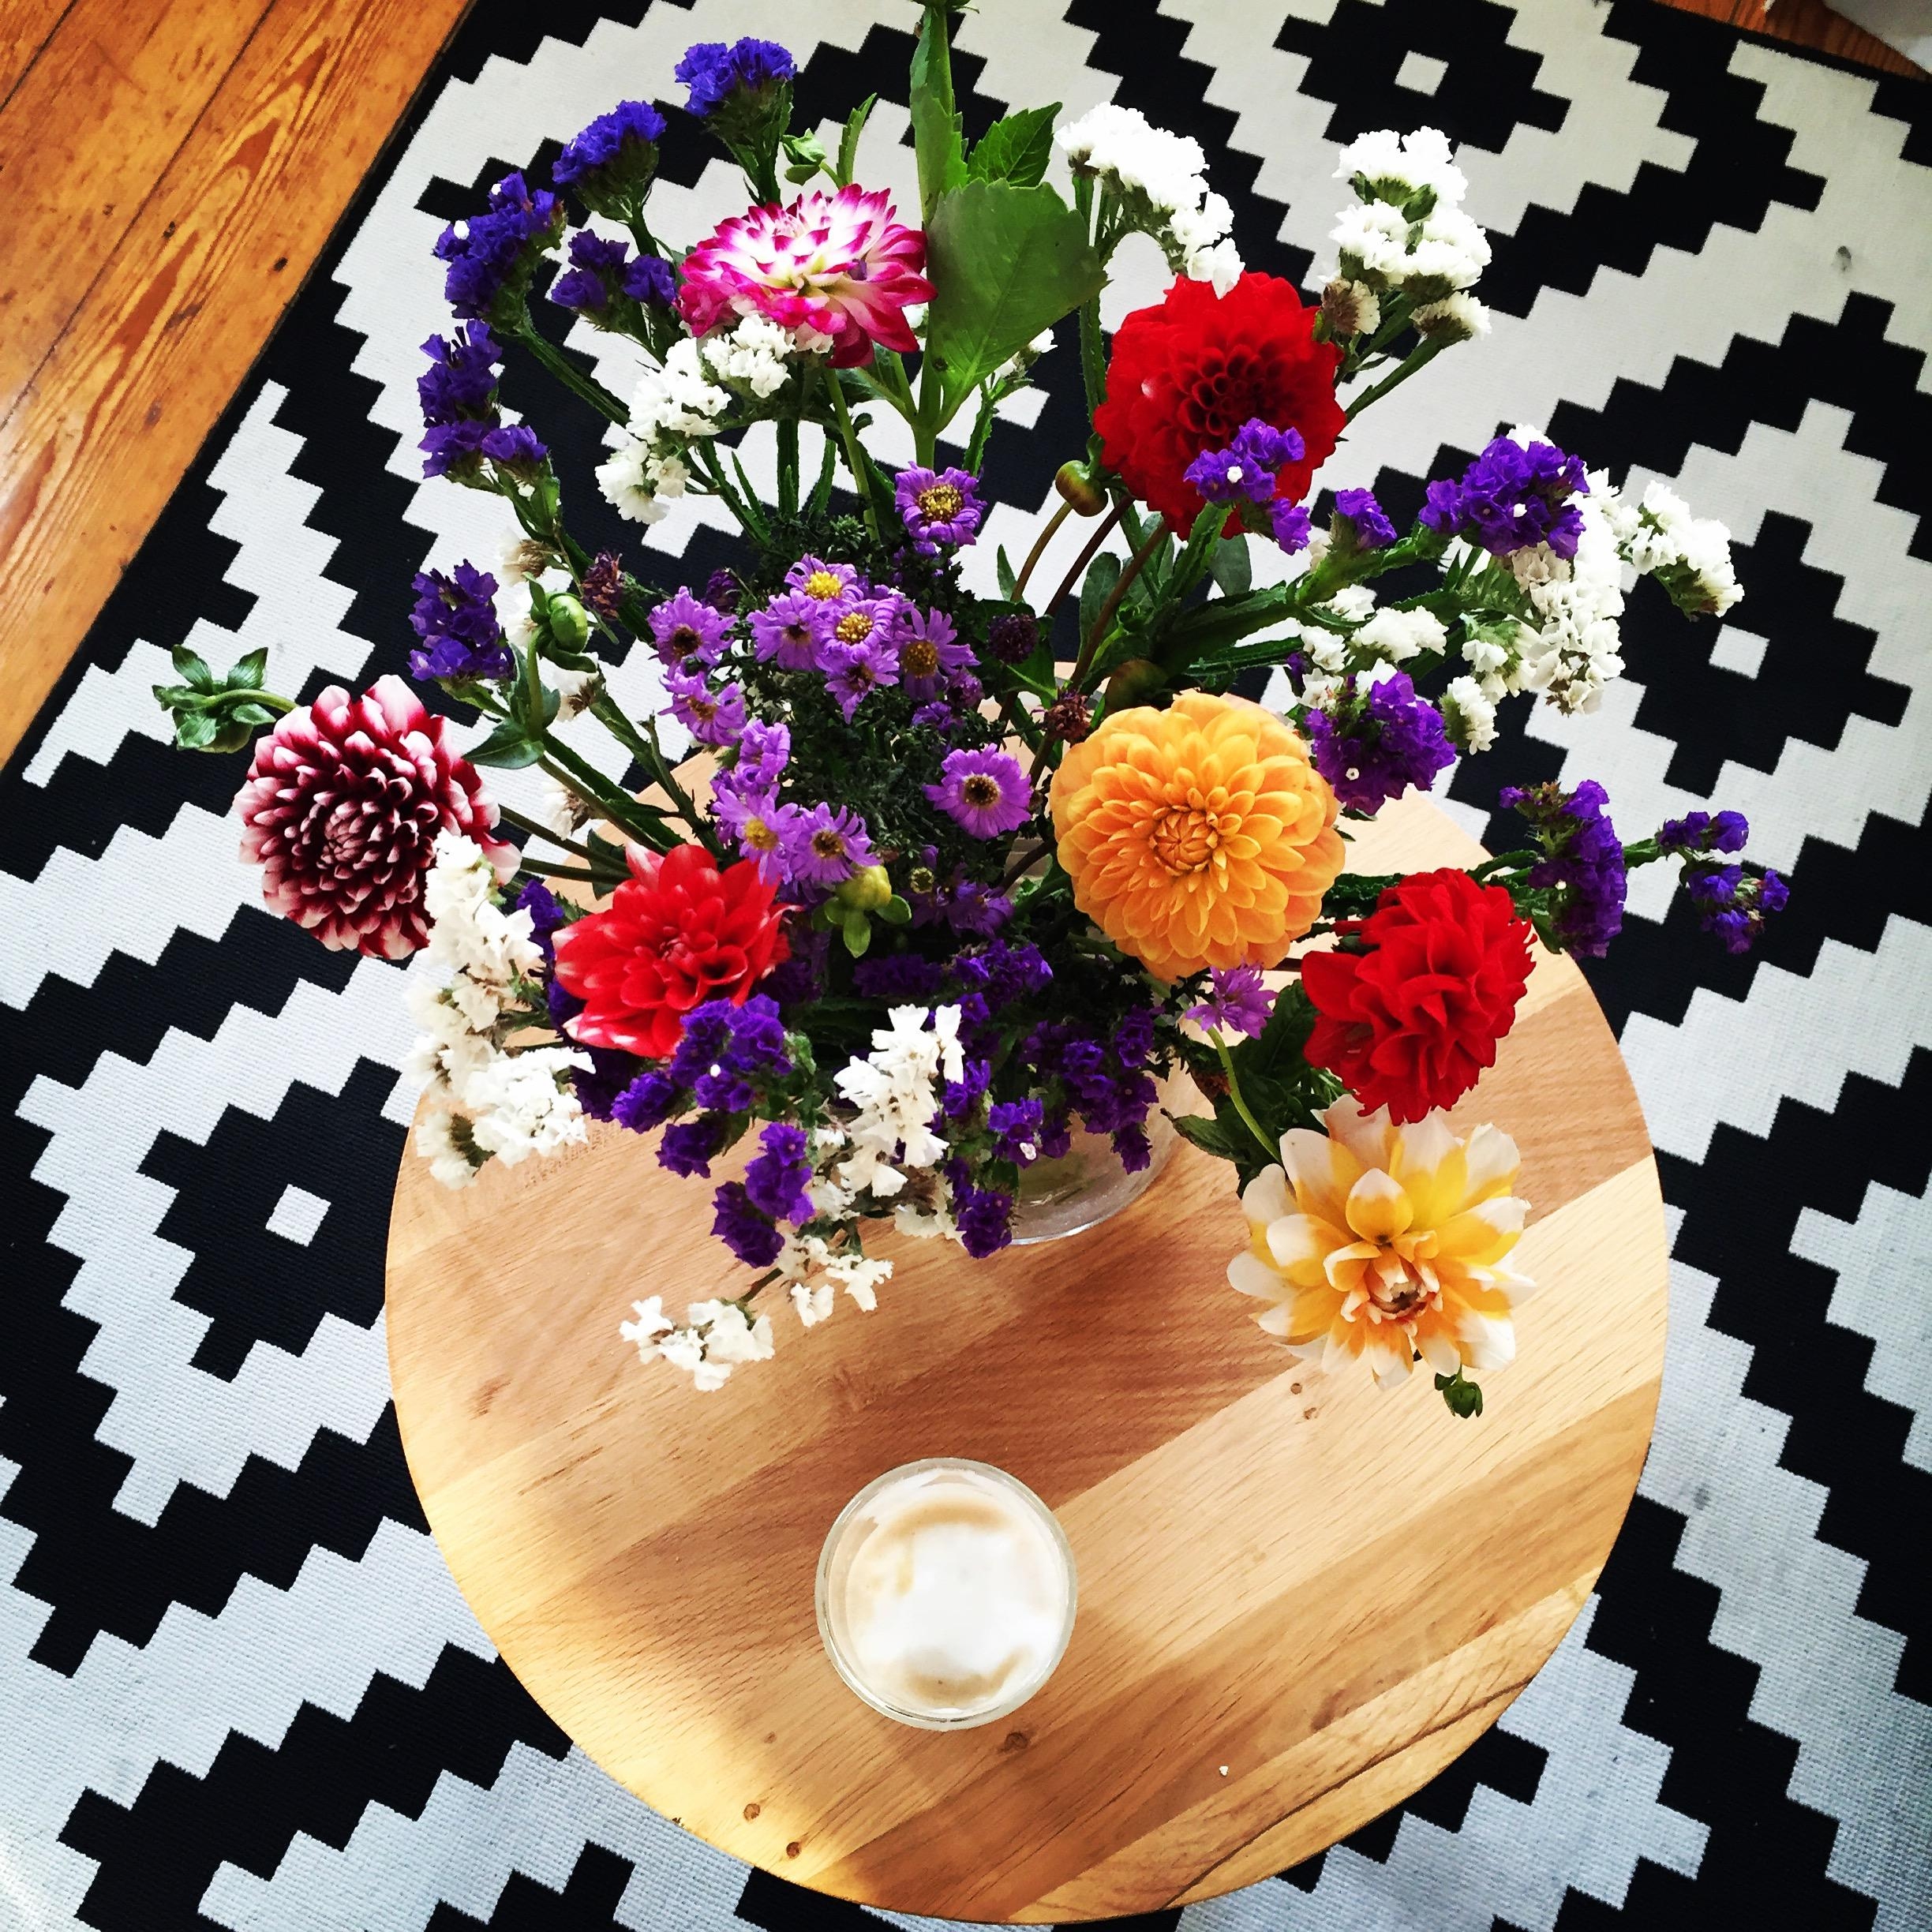 Coffee, flowers and rugpatterns #teppich #livingchallenge